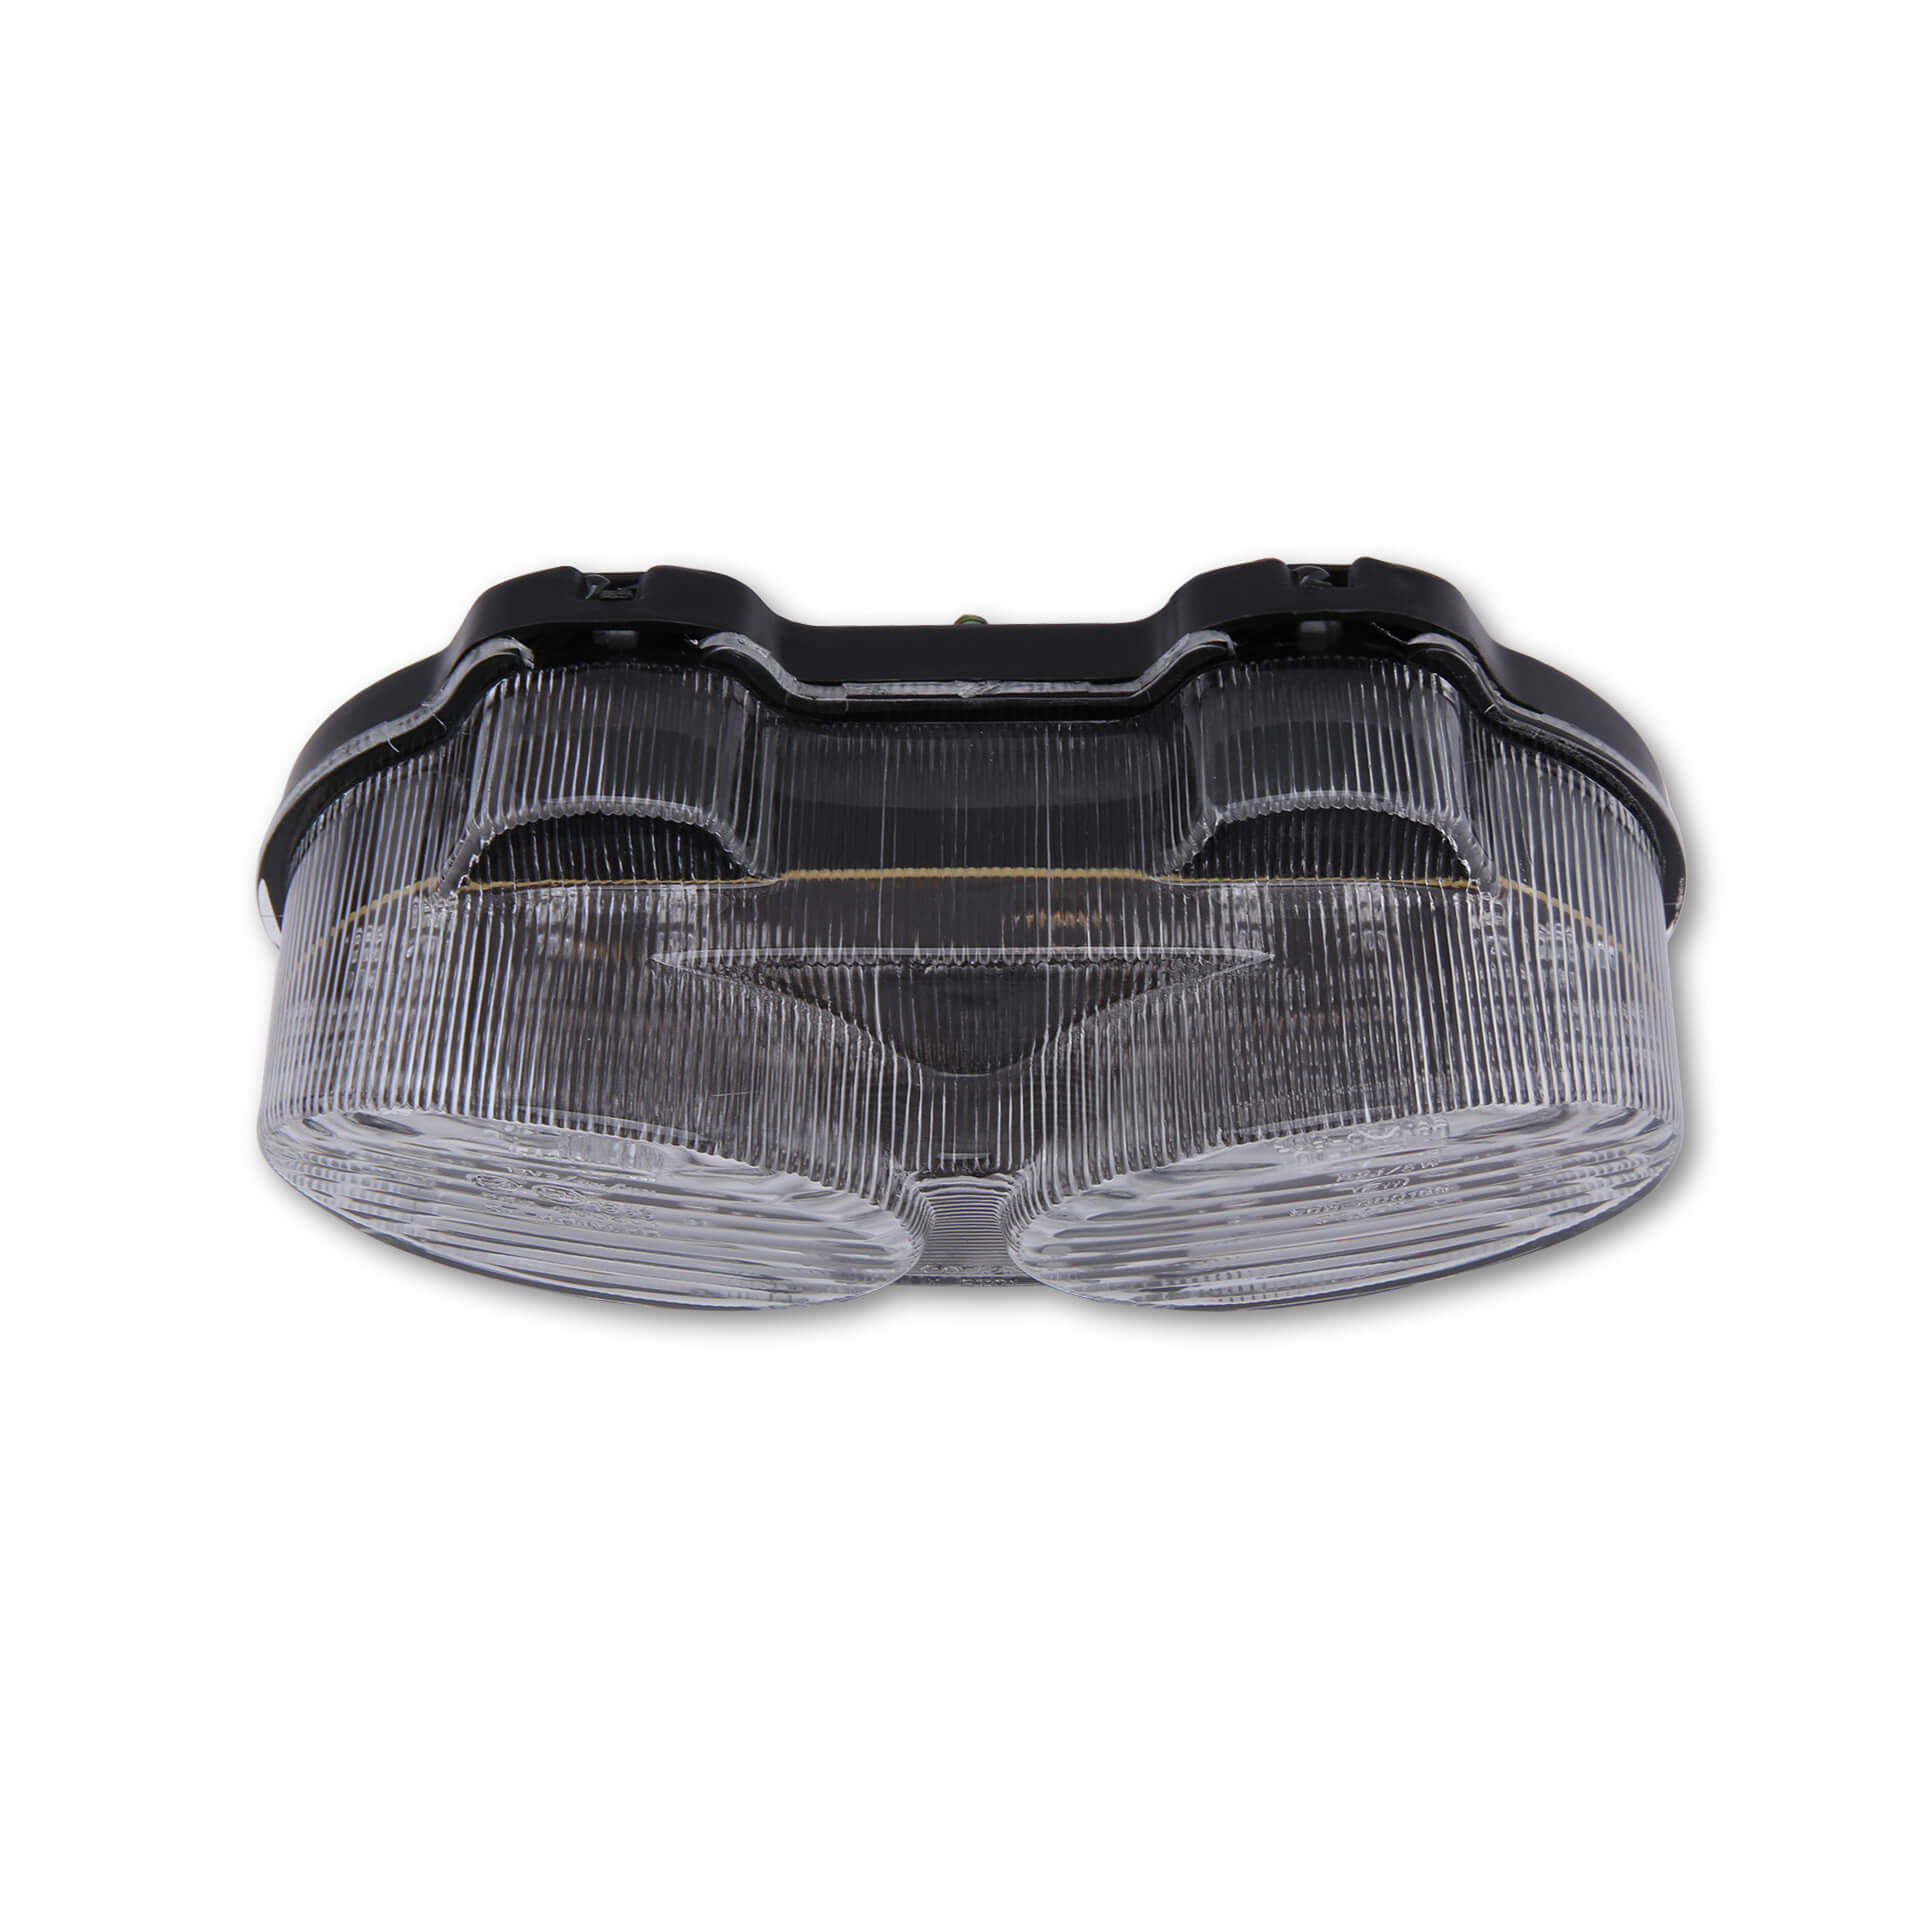 shin_yo LED taillight with transparent glass, KAWASAKI ZX-6R/9R, ZR-7, various year of construction.